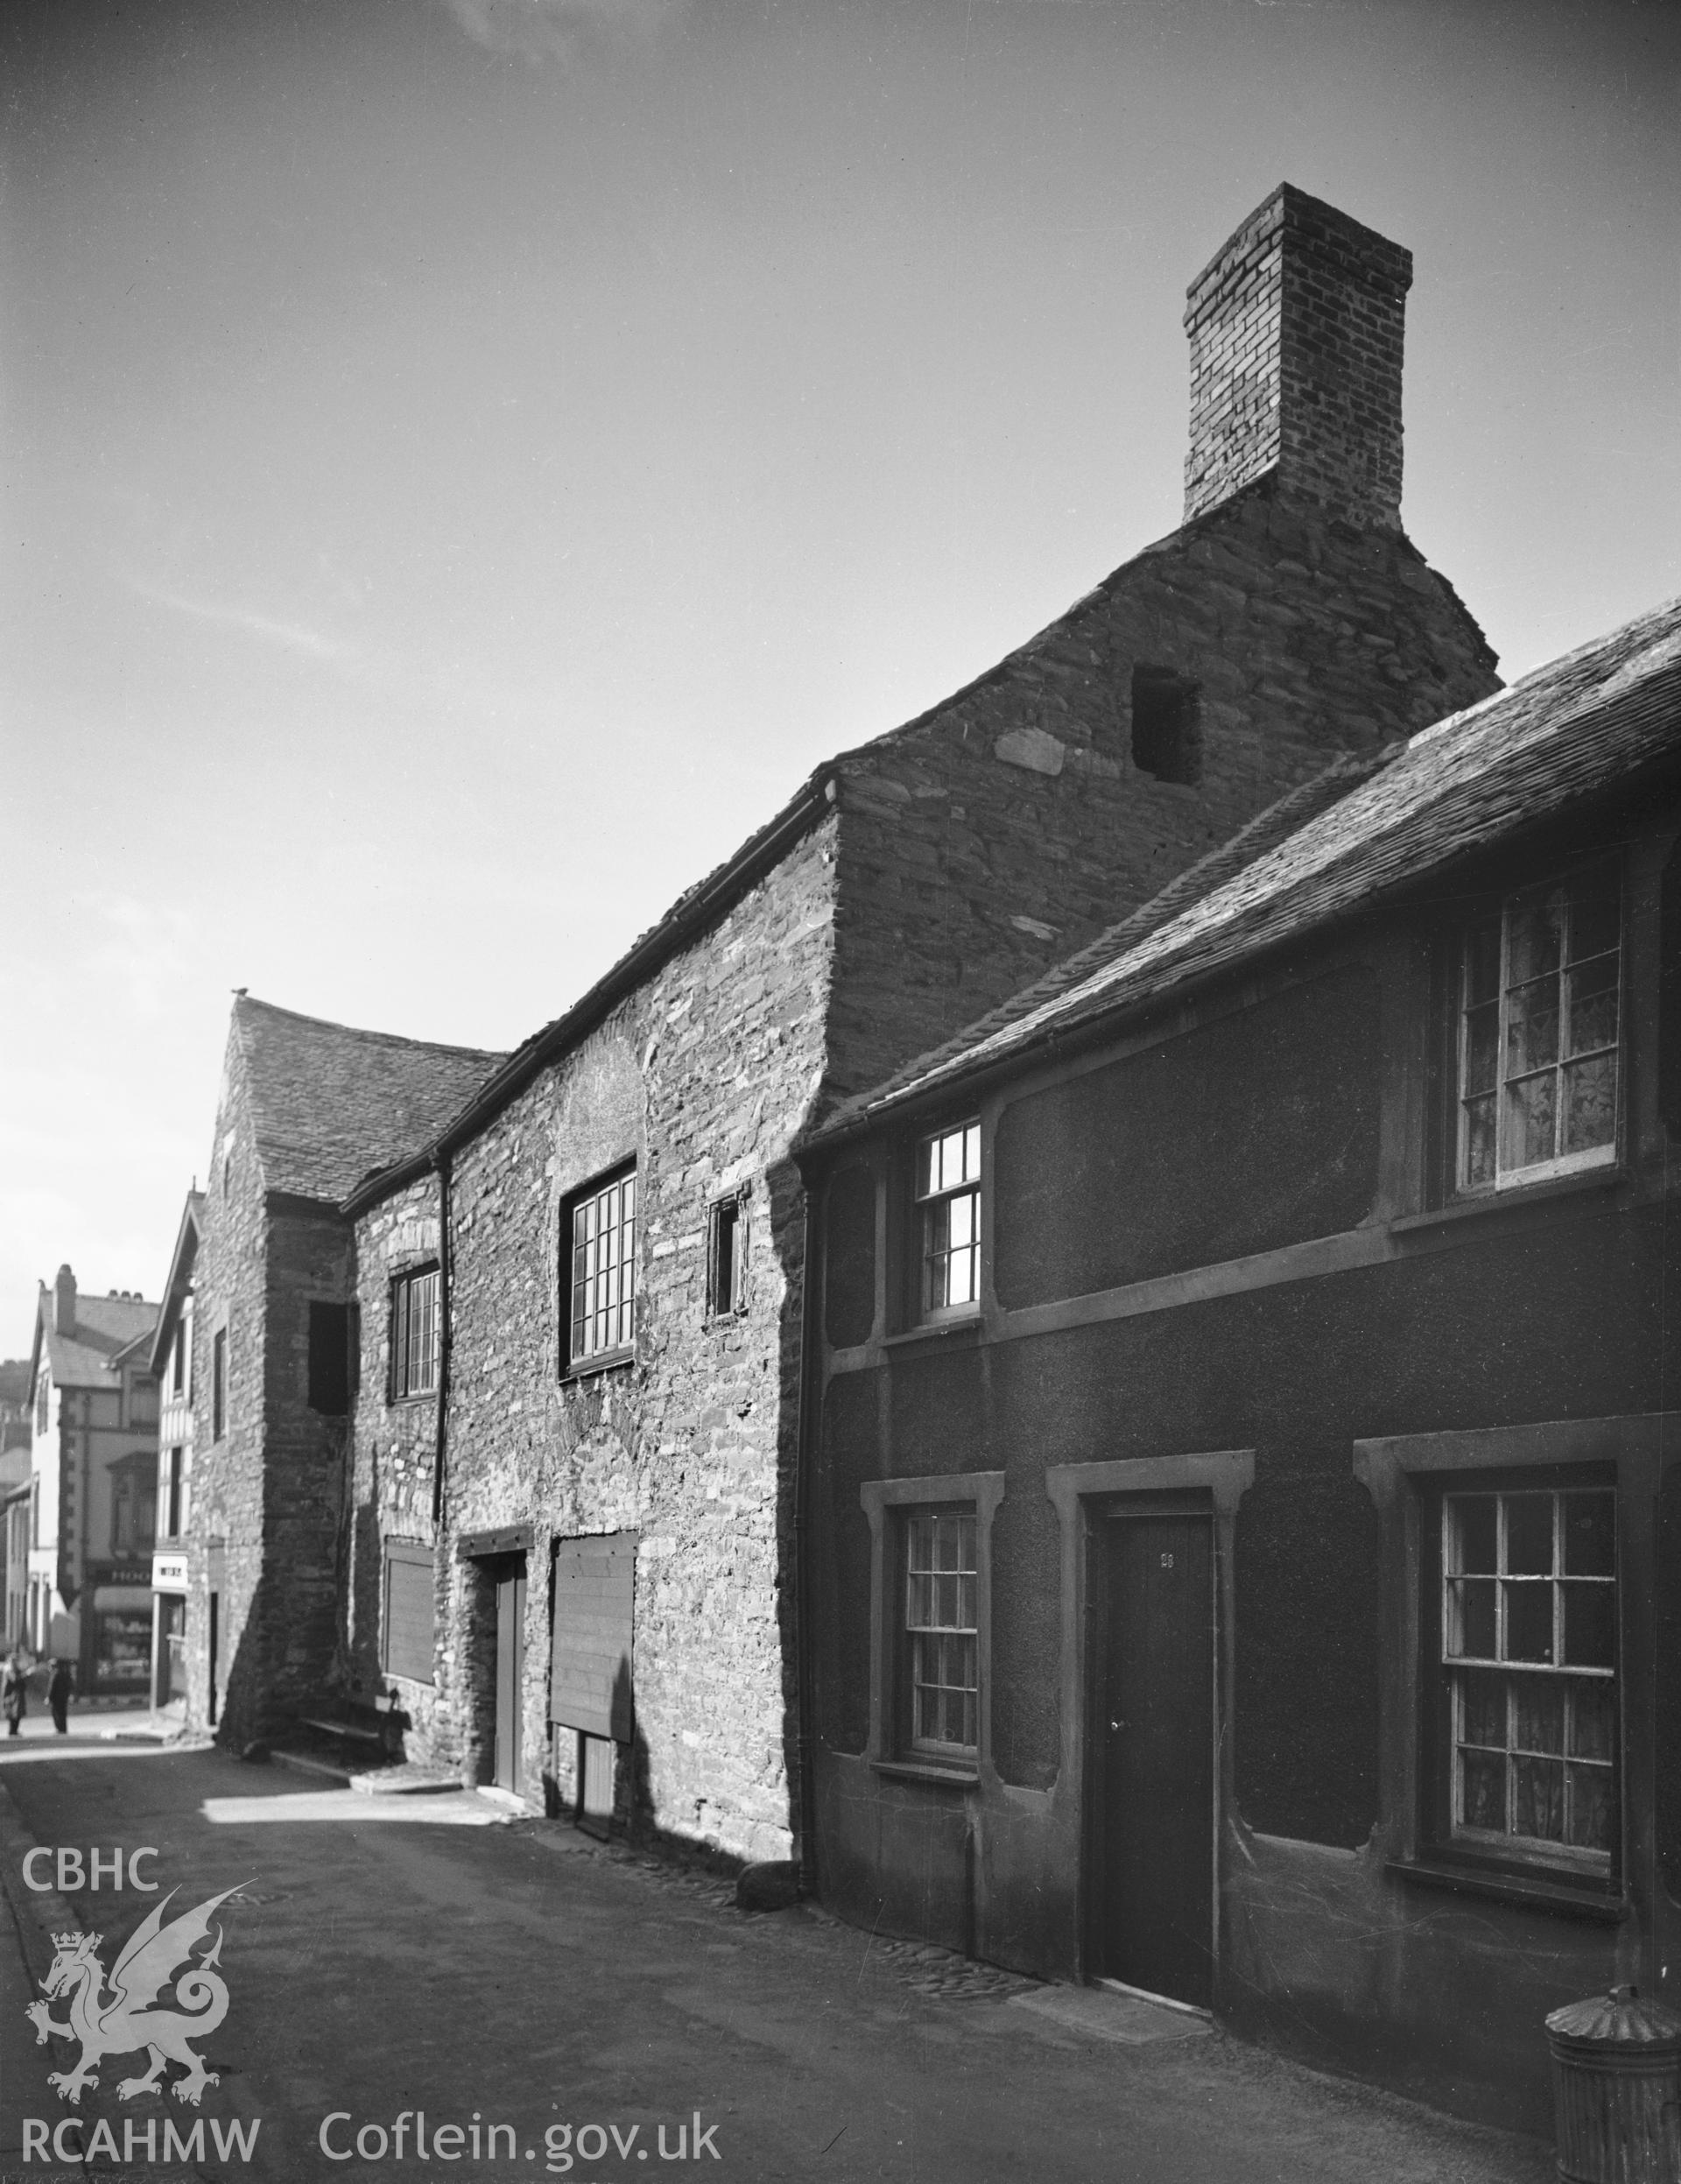 Exterior view of Parlwr Mawr, Conwy taken 01.01.1947.